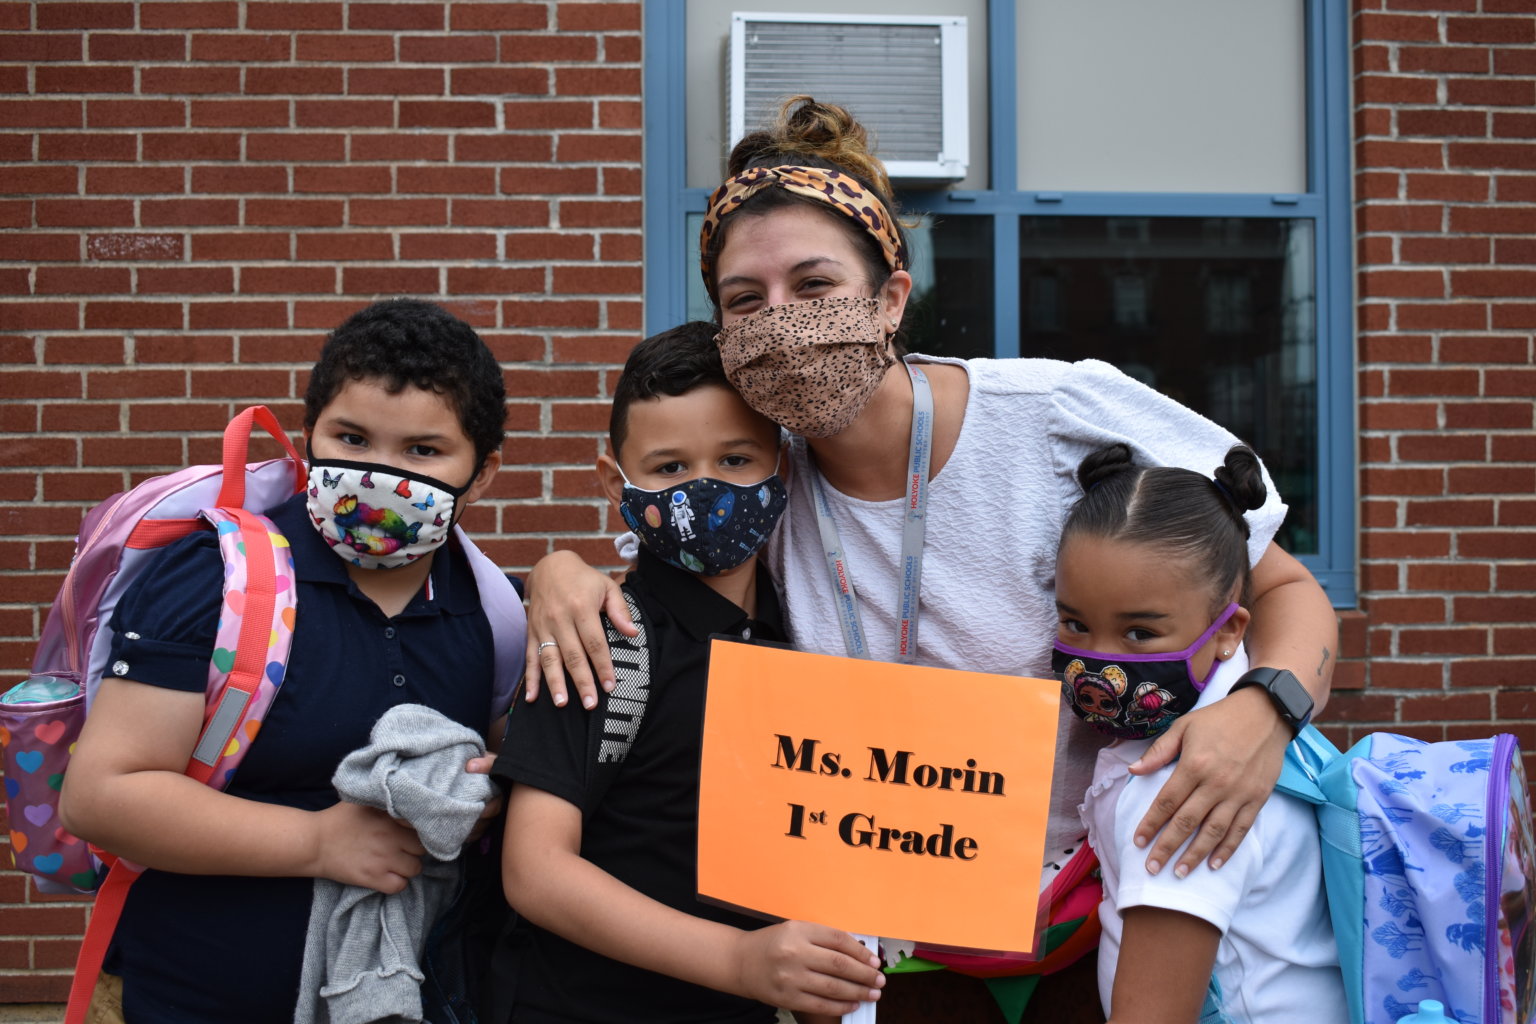 Teacher holding a sign that says Ms. Morin 1st Grade accompanied by three students